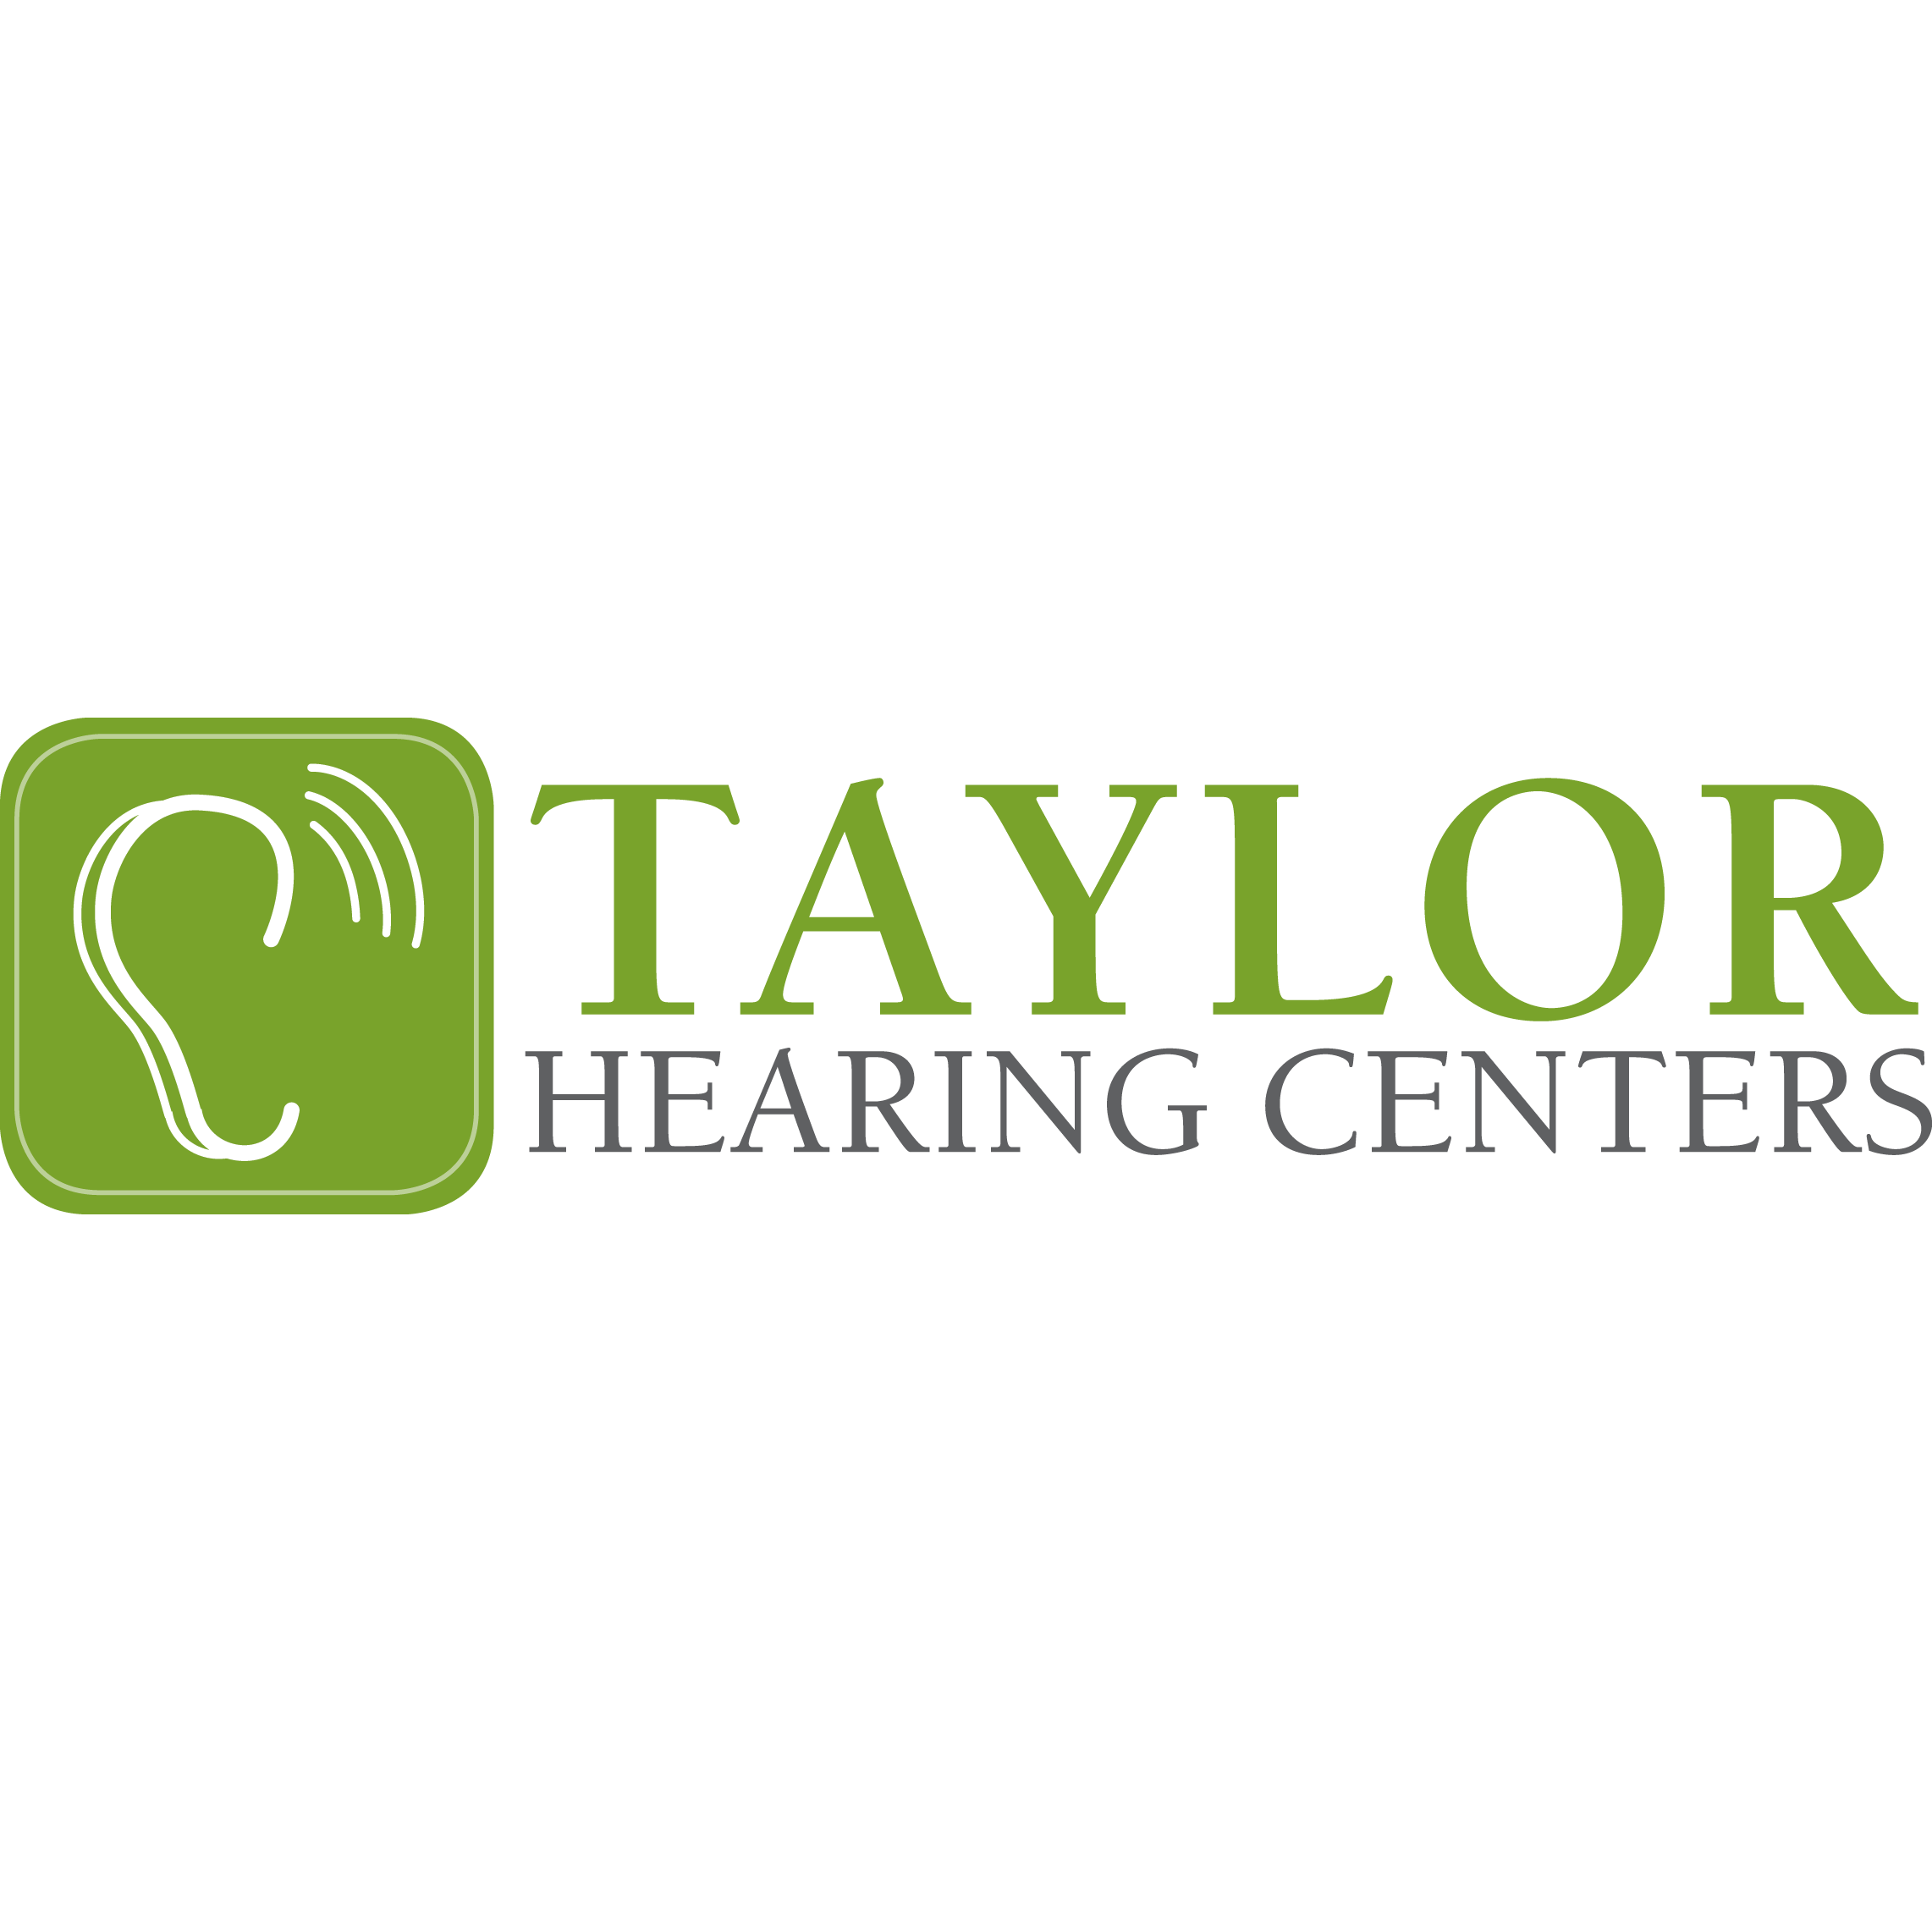 Taylor Hearing Centers - Franklin - Franklin, TN 37067 - (615)807-1274 | ShowMeLocal.com